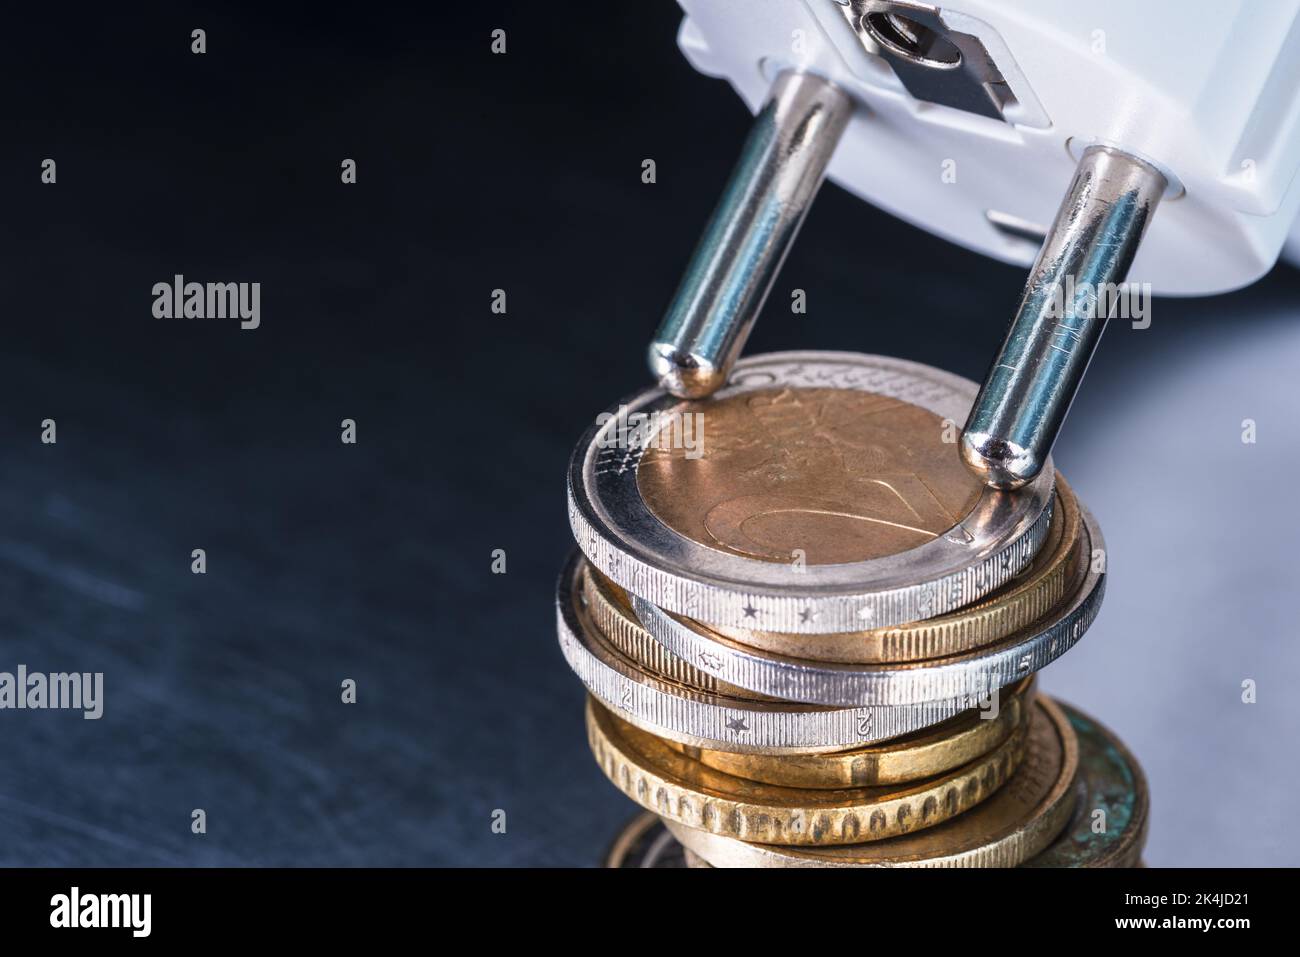 Pile of euro coins and electrical socket, concept of increasing energy prices Stock Photo